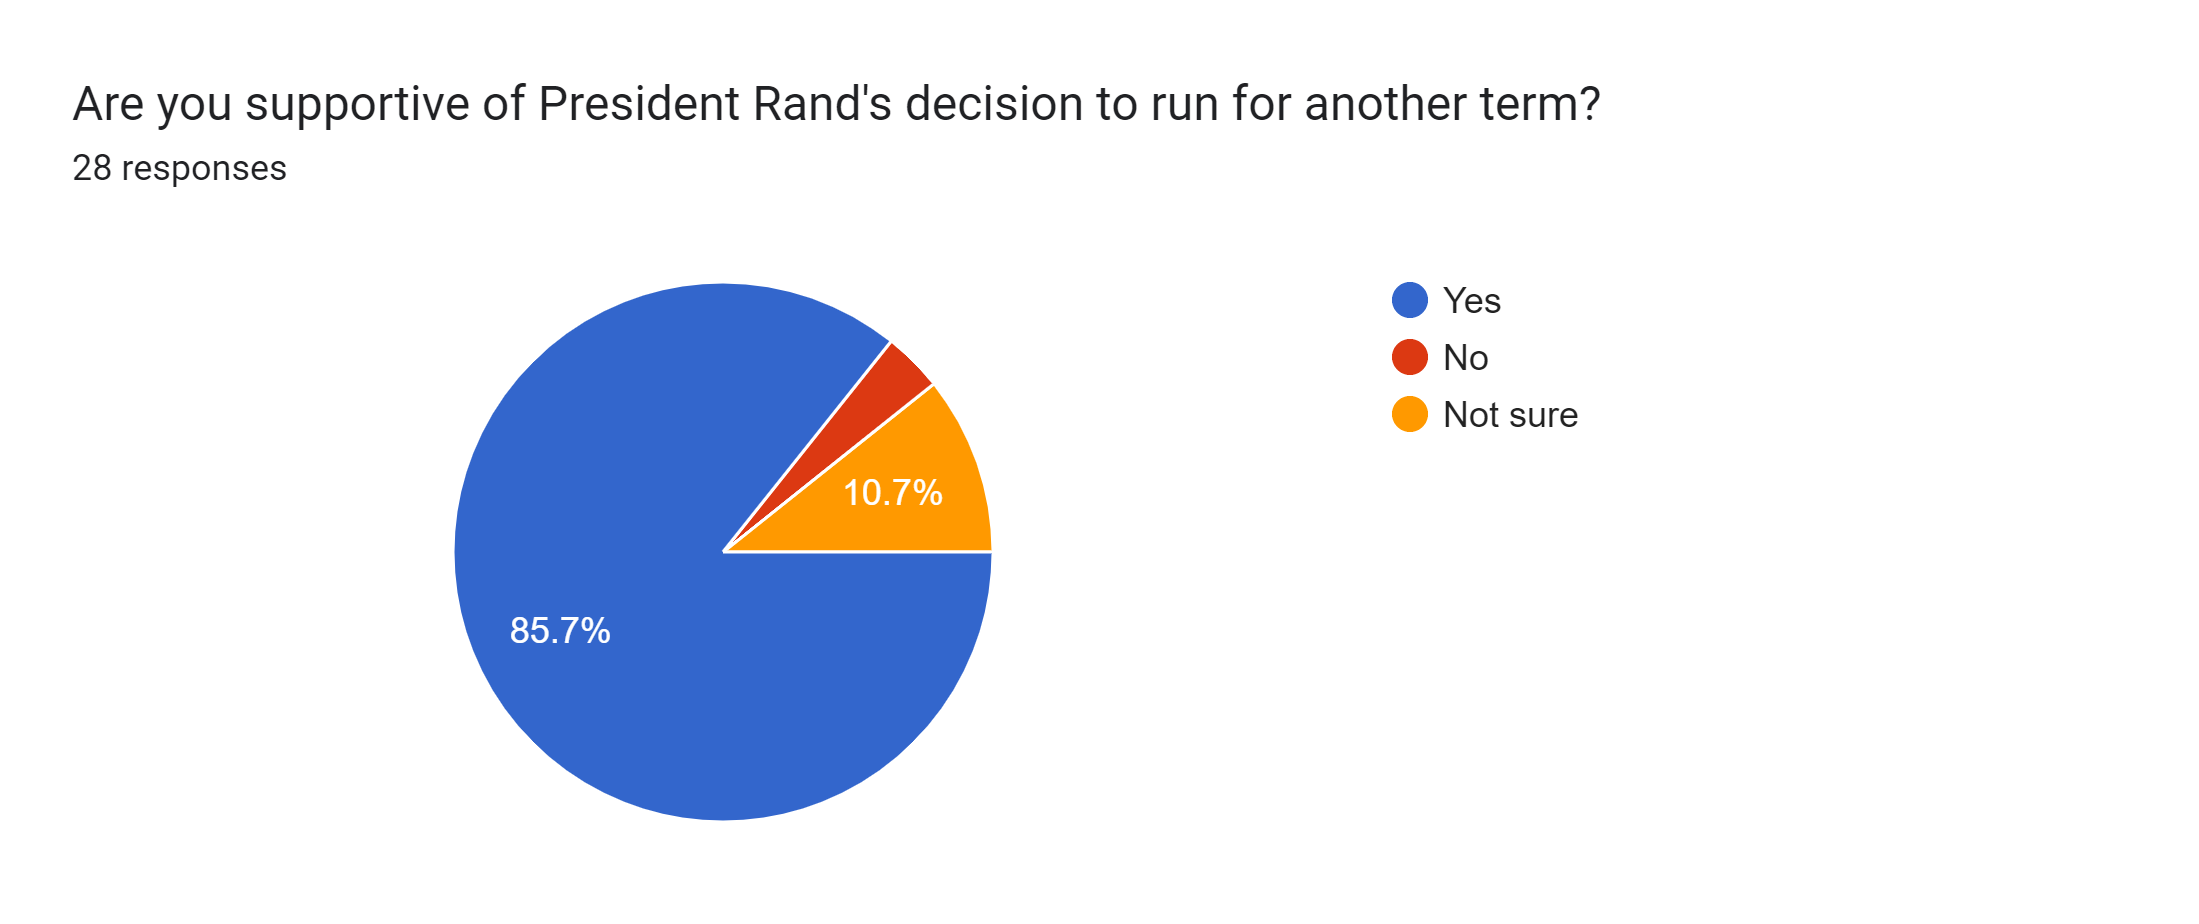 Forms response chart. Question title: Are you supportive of President Rand's decision to run for another term?. Number of responses: 28 responses.